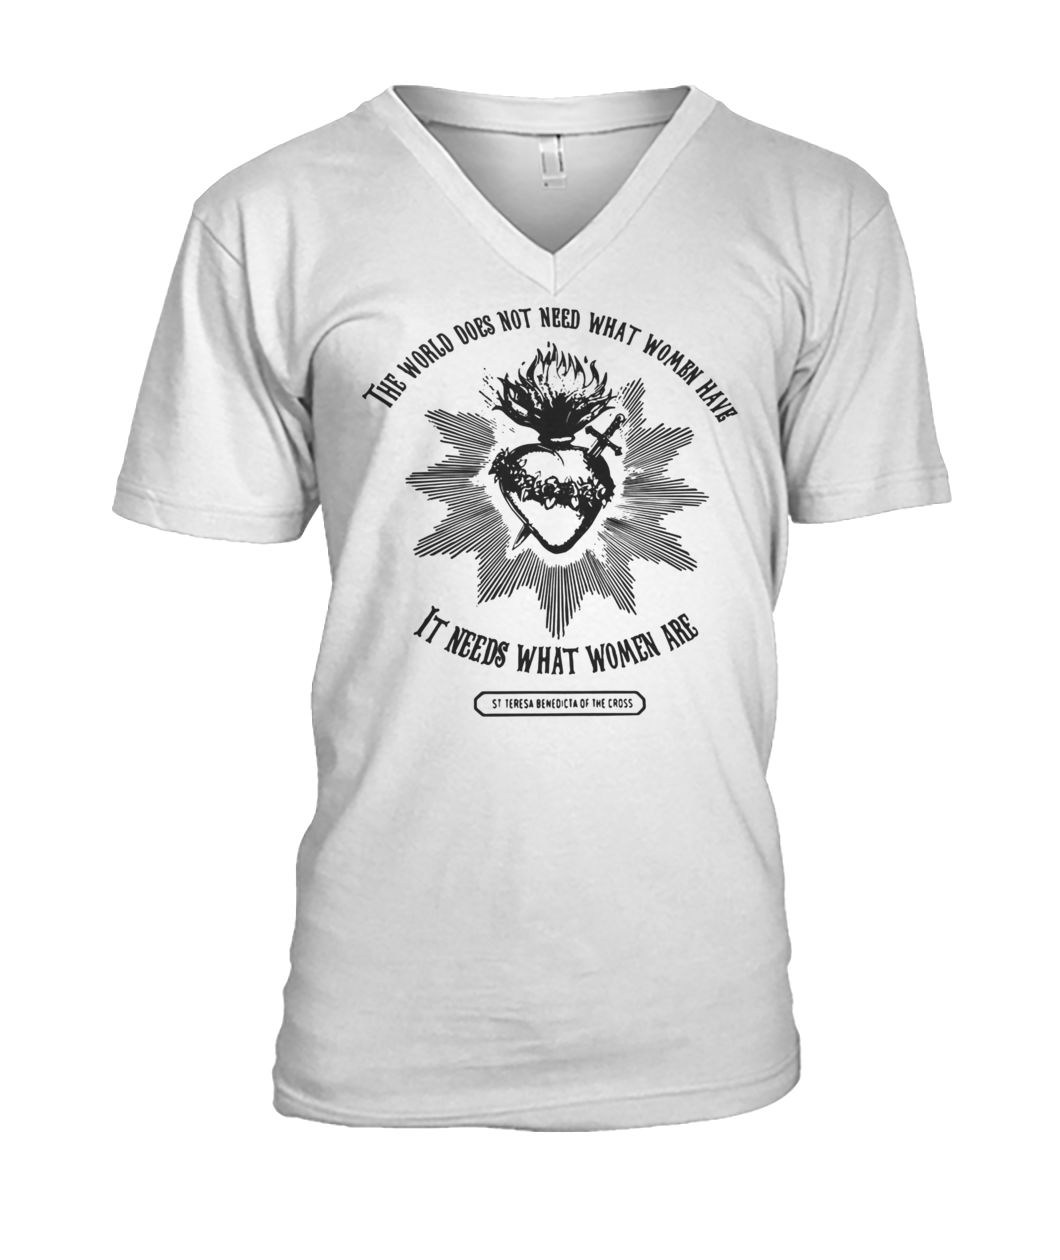 The world does not need what women have it needs mens v-neck